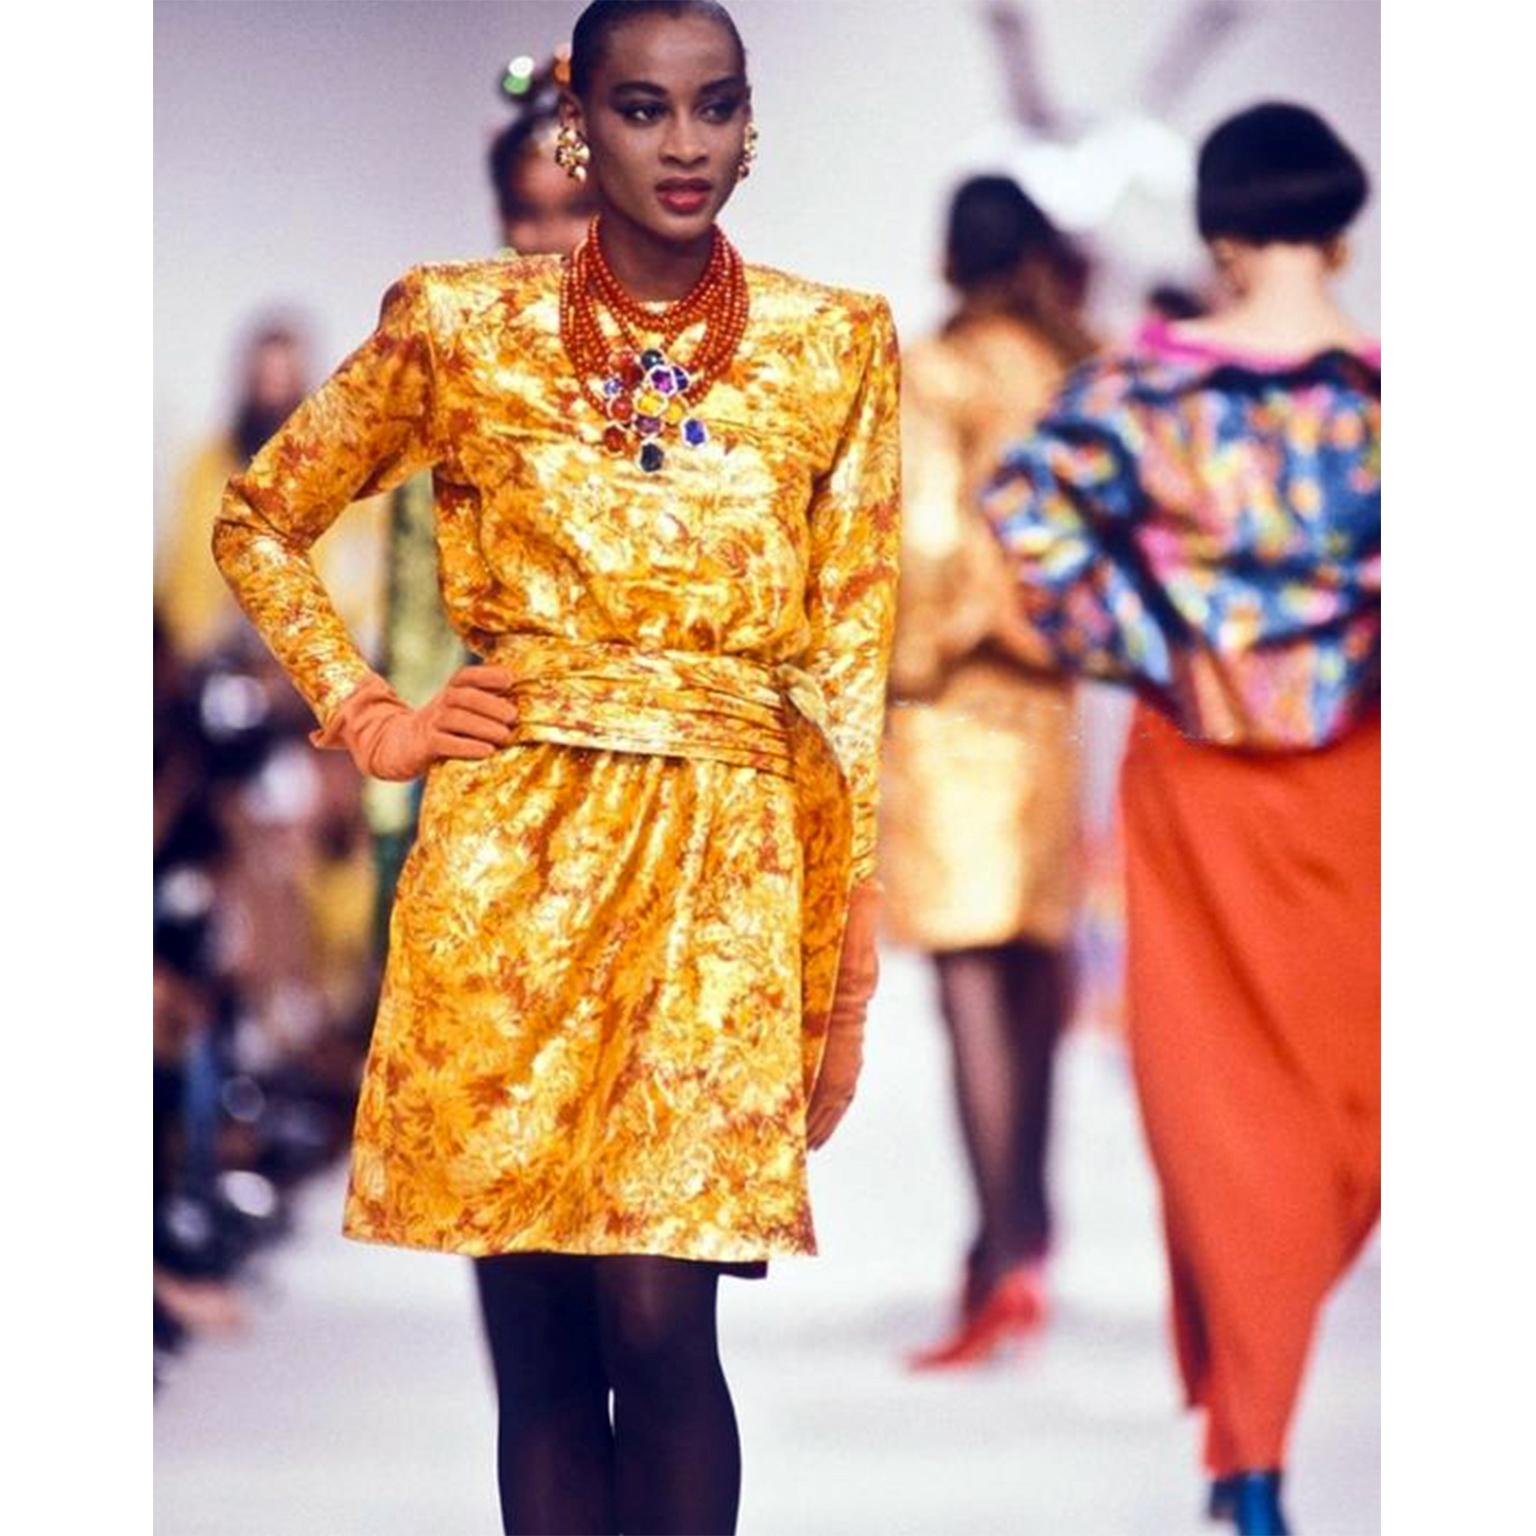 This outstanding vintage YSL dress is deadstock and was designed by Yves Saint Laurent for his Autumn/Winter 1989/90 collection. We are showing an image of the same dress on the runway from that season. (image not included).

The dress is in a bold